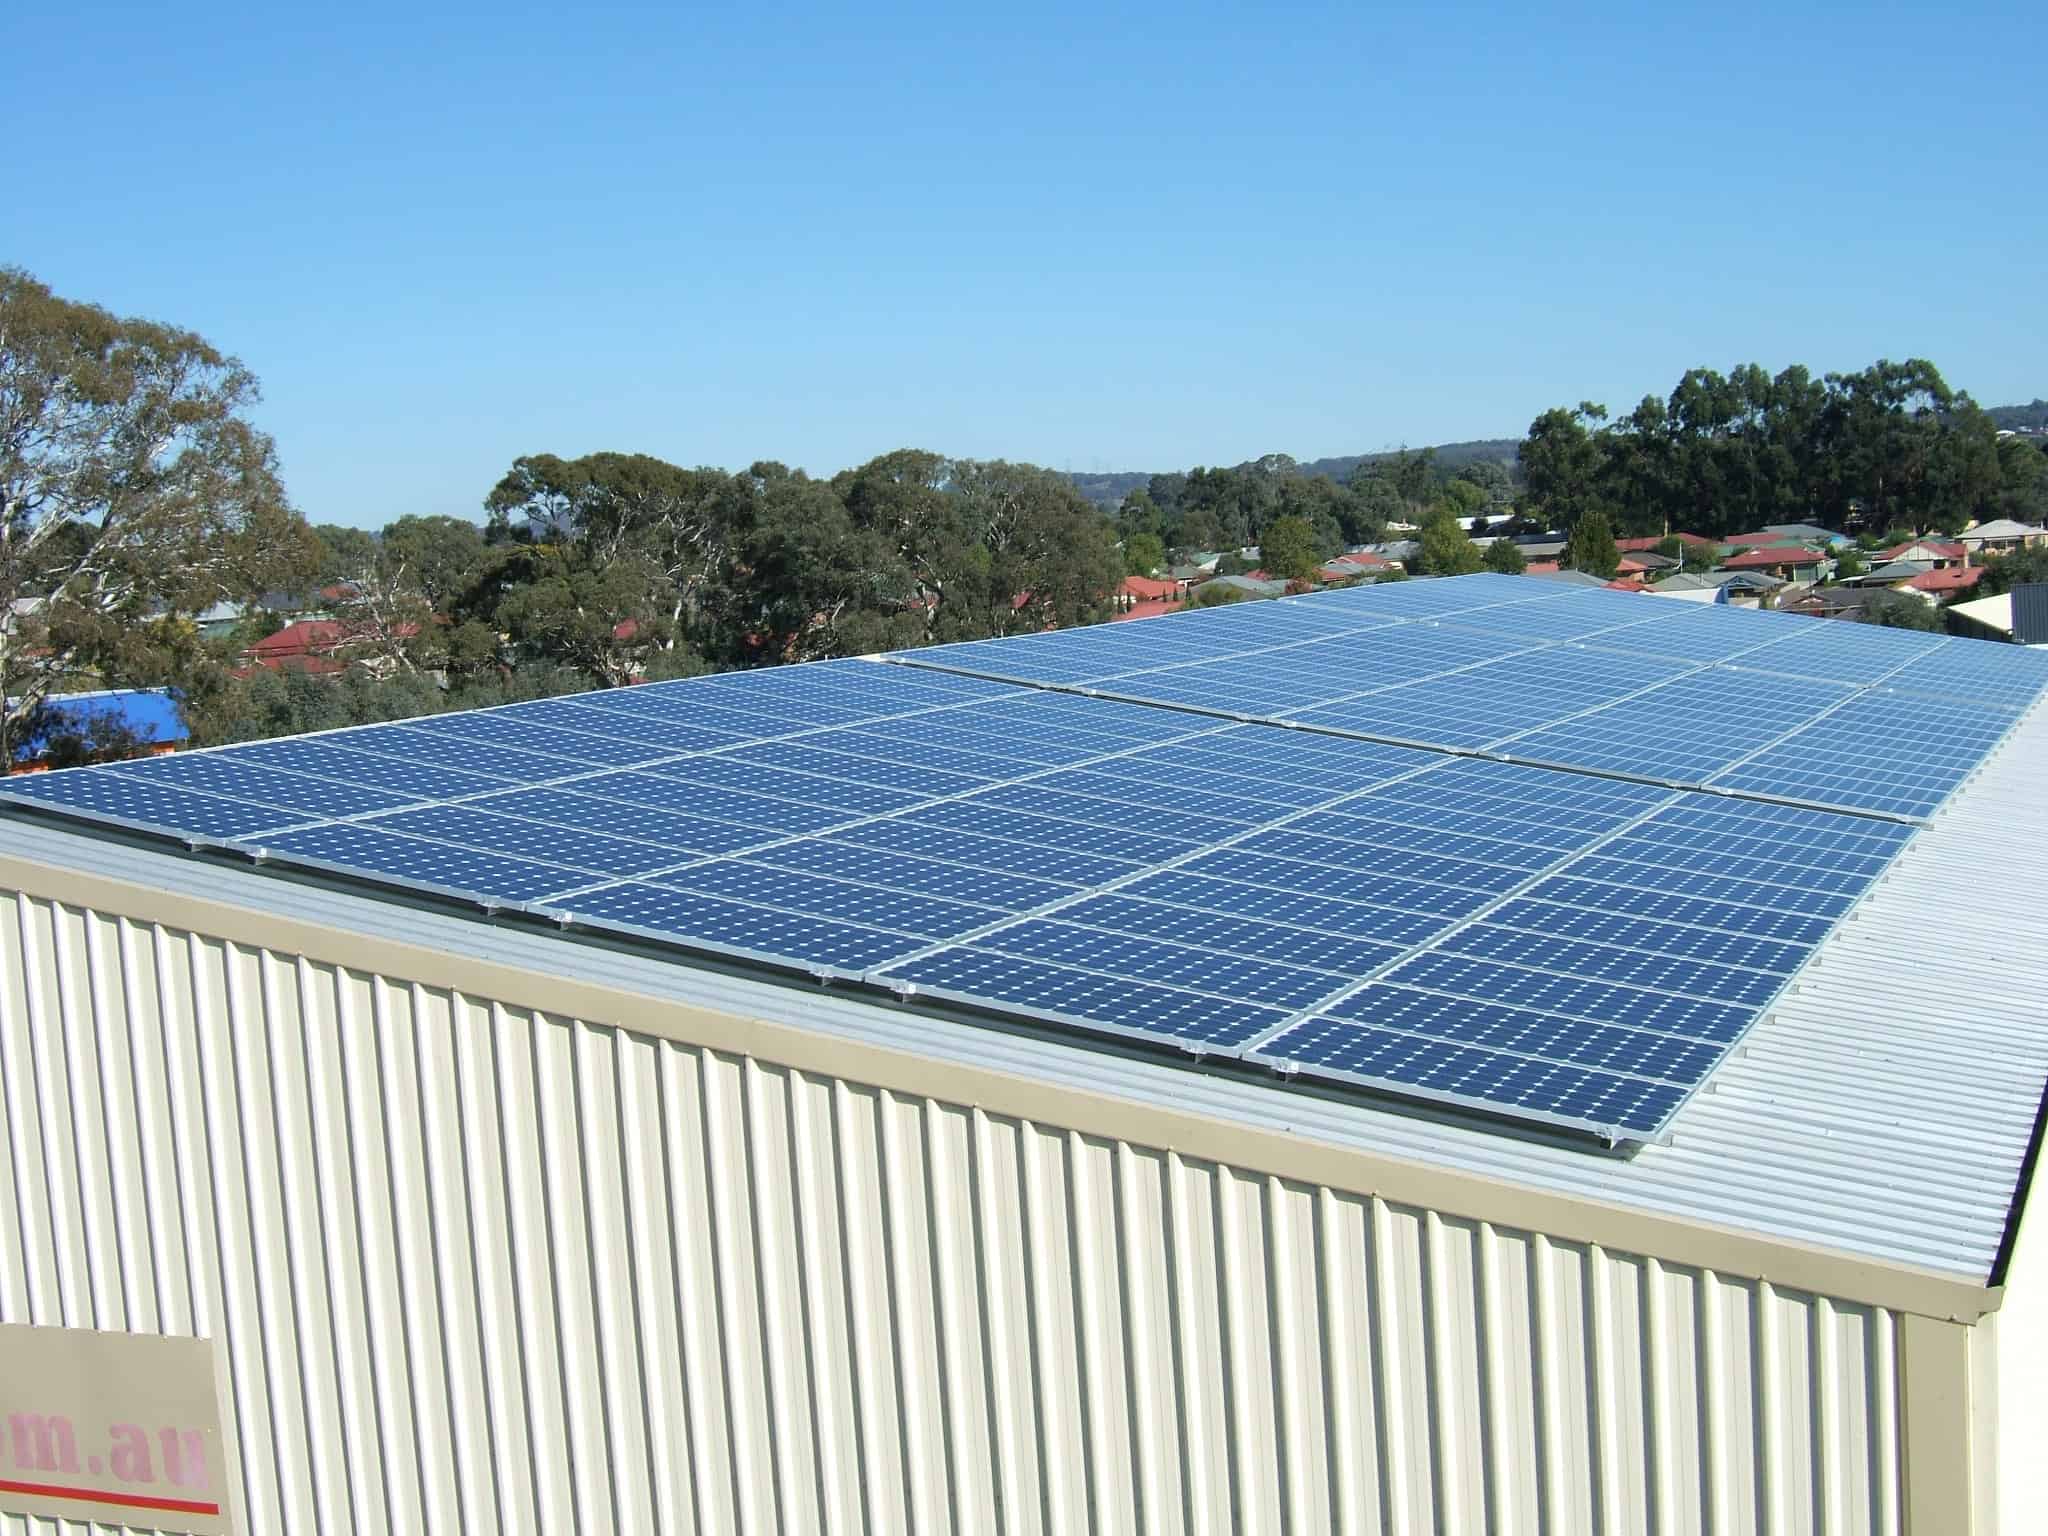 Able Self Storage SOLAR PANELS MT BARKER - Able Self Storage